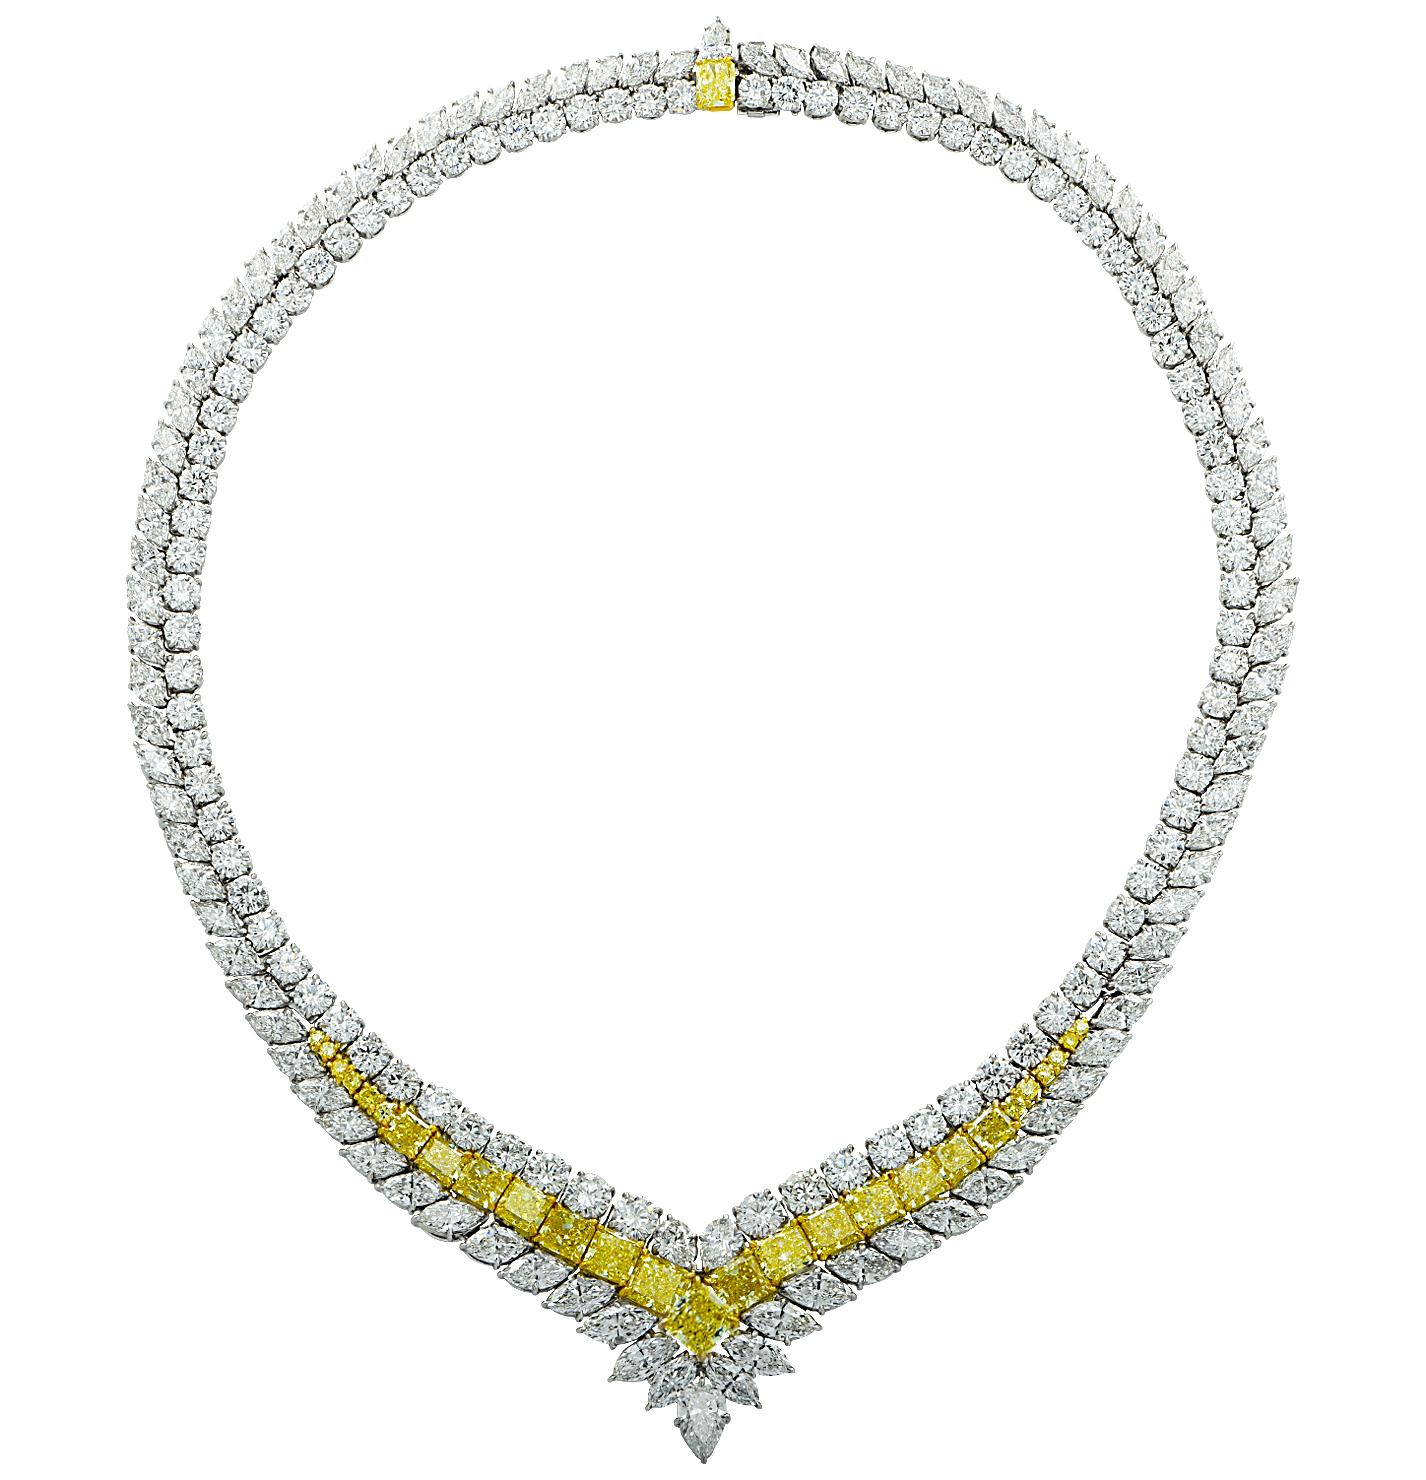 80.81 Carat GIA Certified Fancy Intense Yellow and White Diamond Necklace For Sale 1